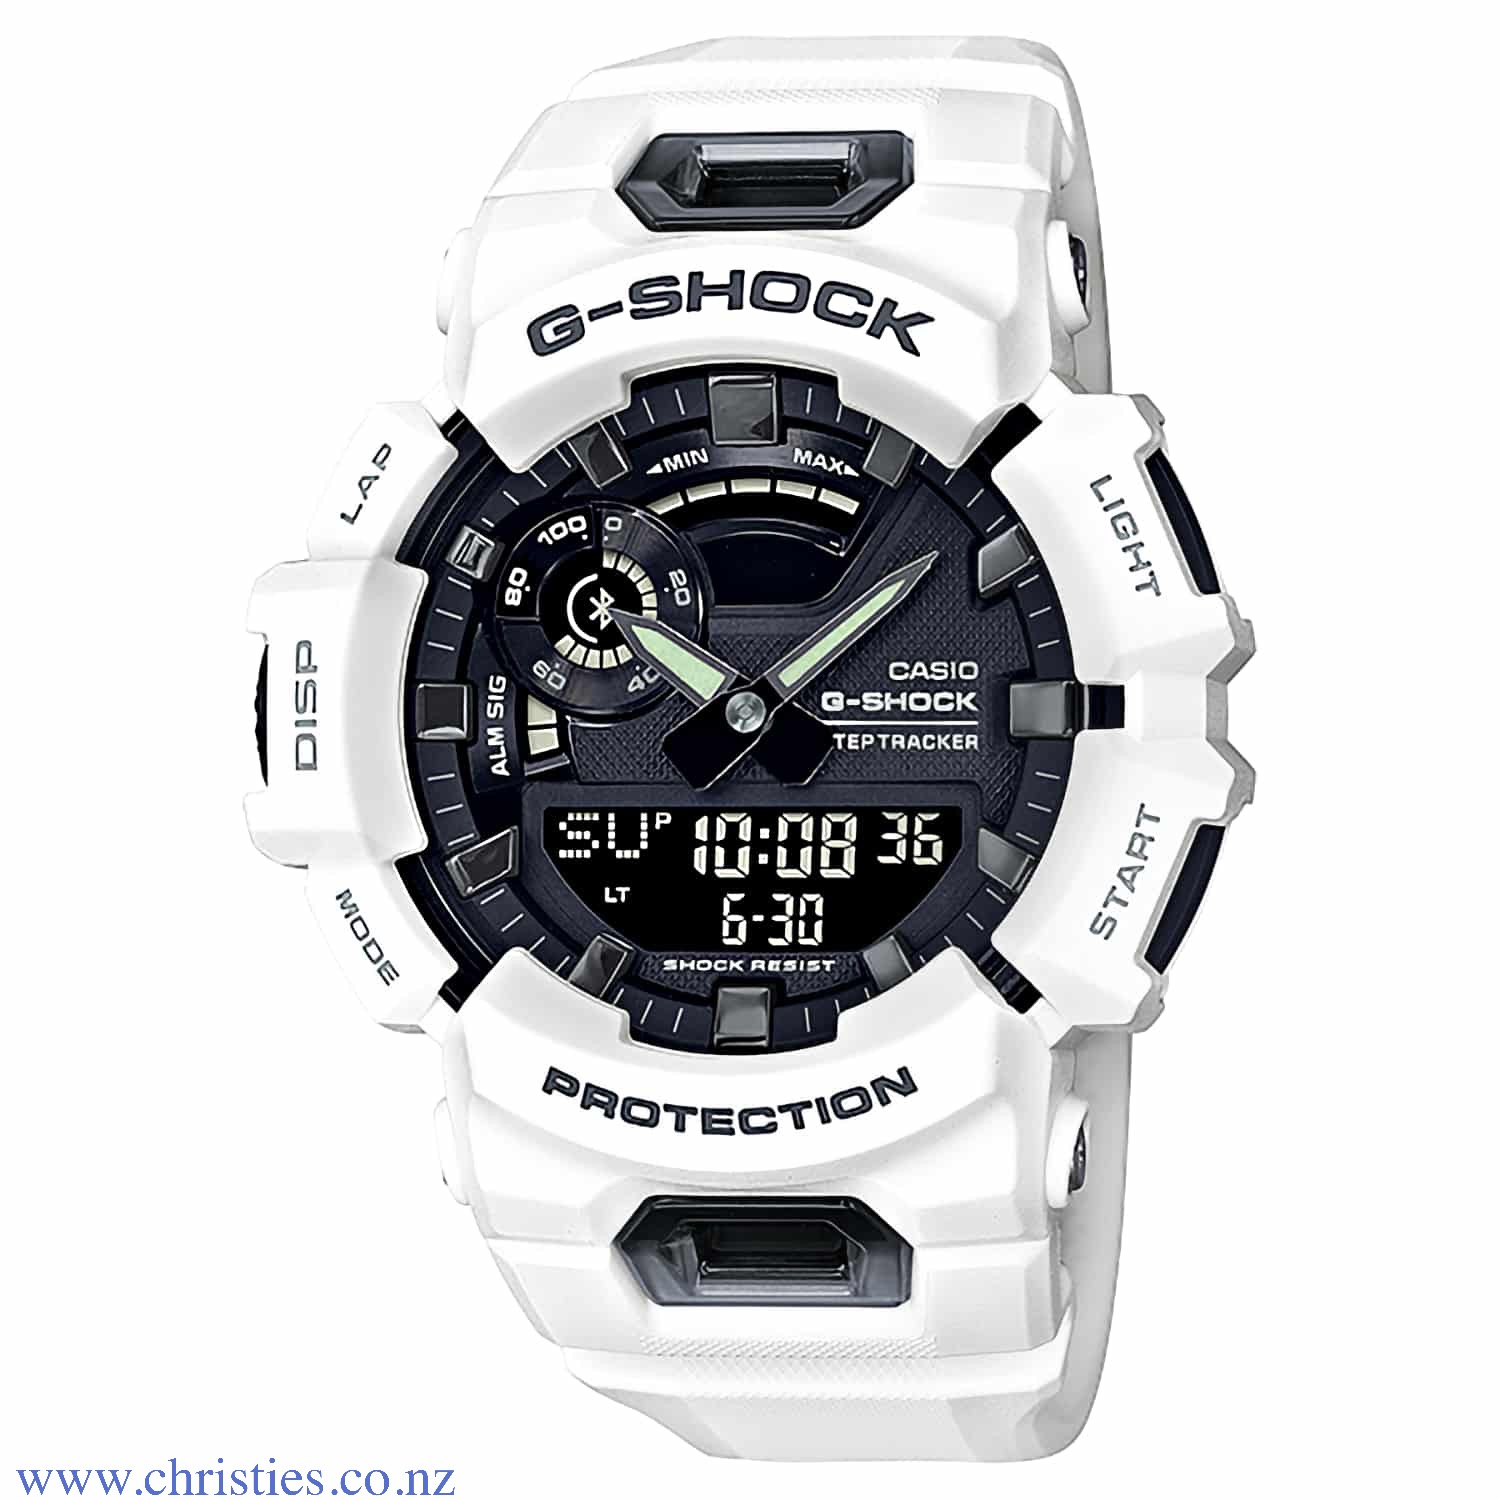 GBA900-7A G-SHOCK G-Squad Sports Watch. Introducing the latest G-SQUAD additions to the GBA-900 Series of Smartphone Link timepieces. This model can measure distance using an accelerometer while linked with the GPS function of a smartphone via Bluetooth®.